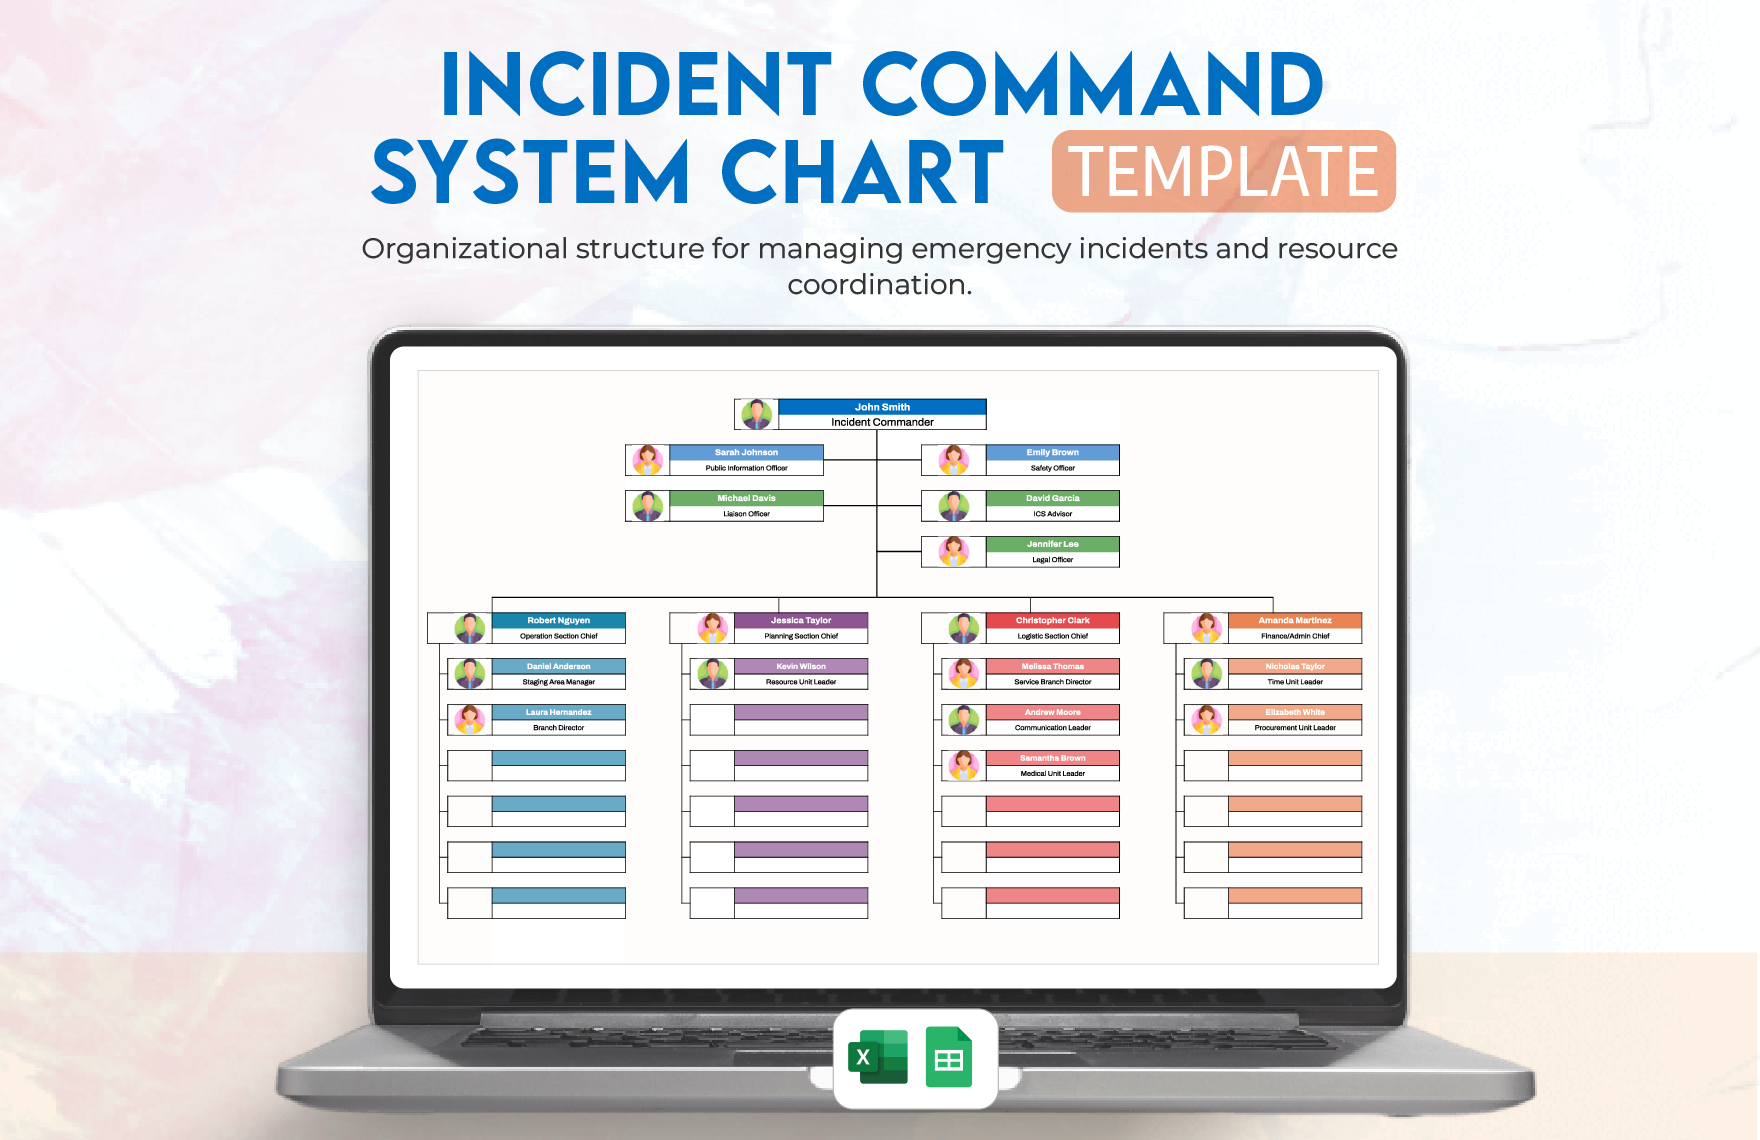 Incident Command System Chart Template in Excel, Google Sheets